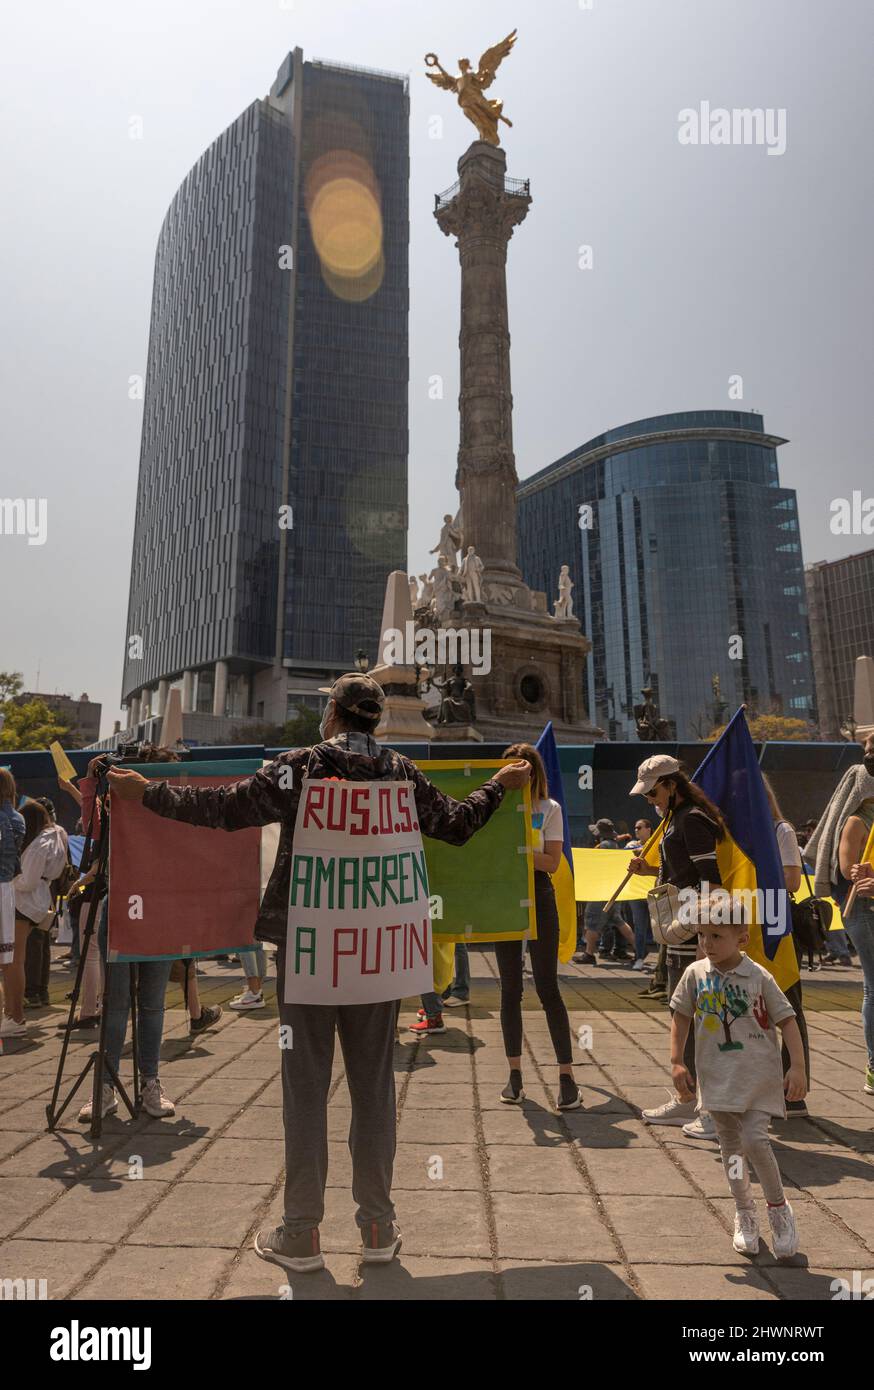 Anti-war protests in Mexico City Ukrainian supporters demonstration in Reforma Street. Flags, indignation and large group of people walking. Stock Photo